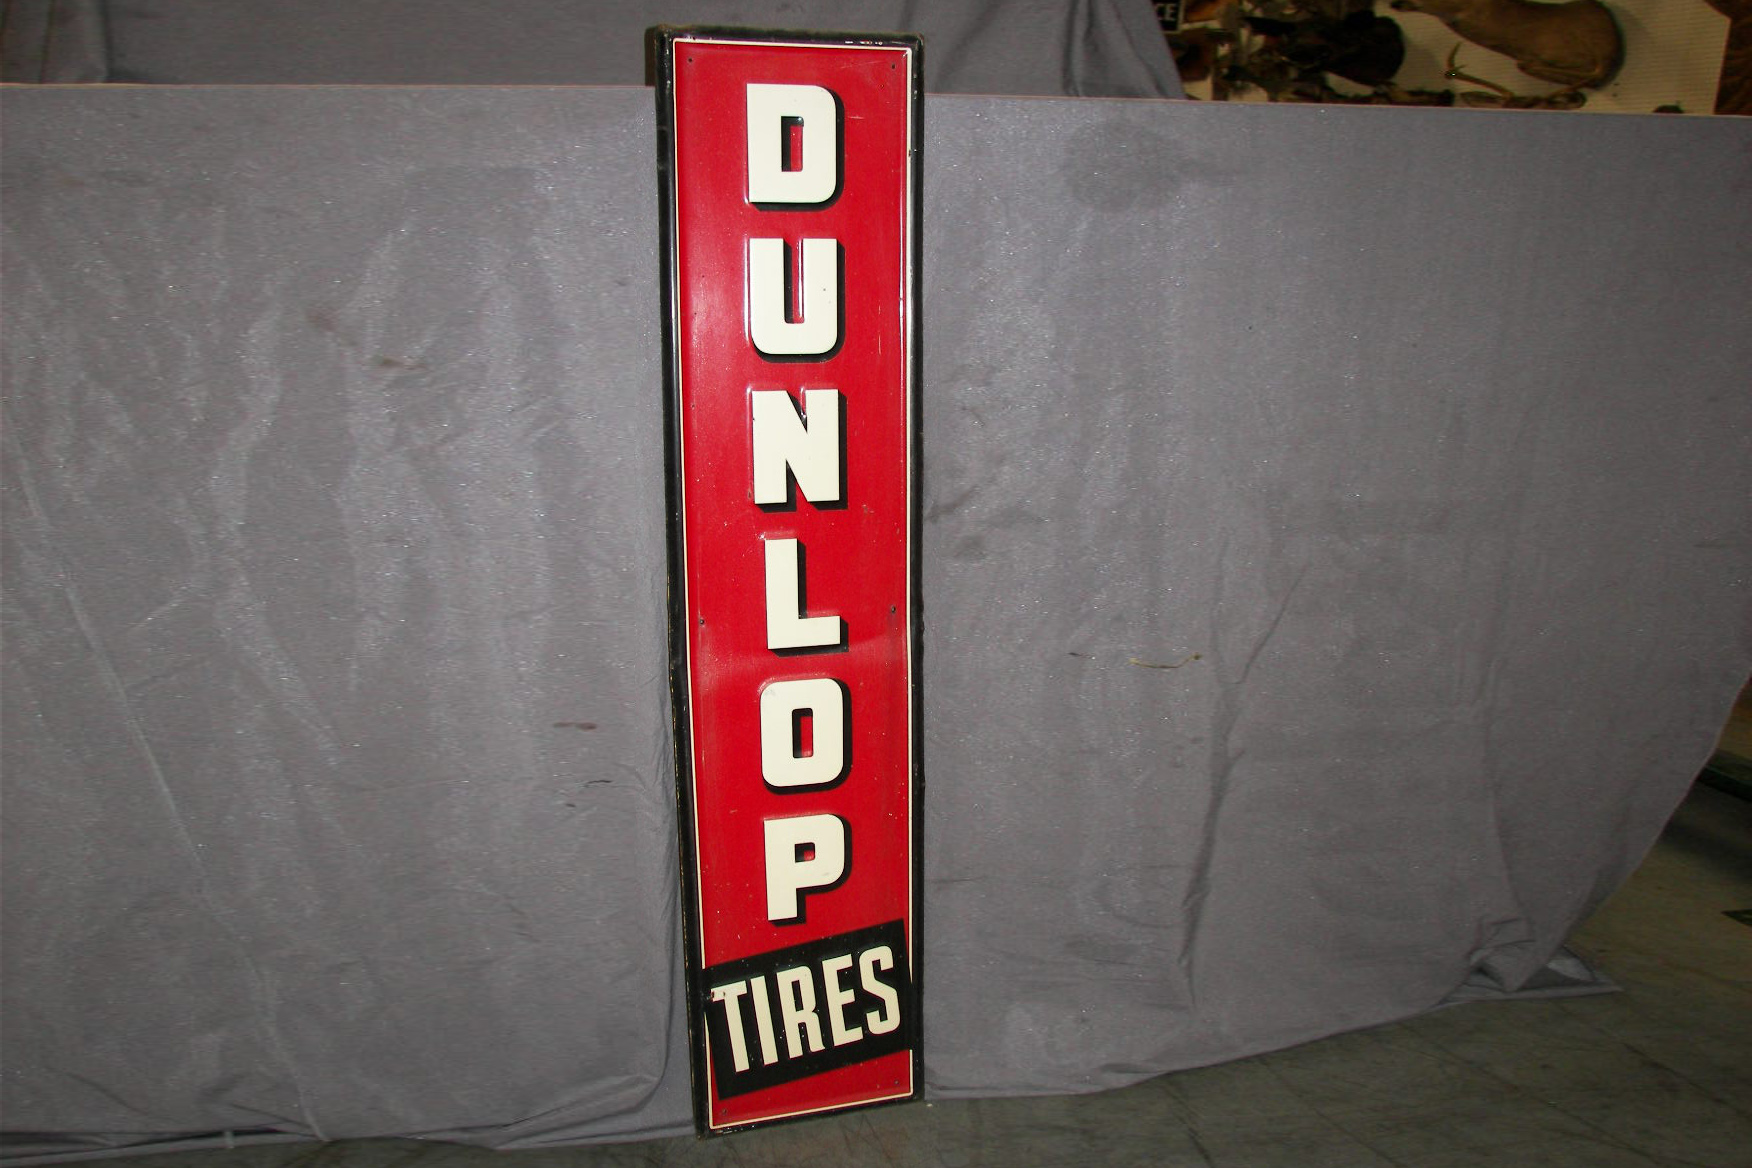 0th Image of a N/A DUNLOP TIRES METAL SIGN